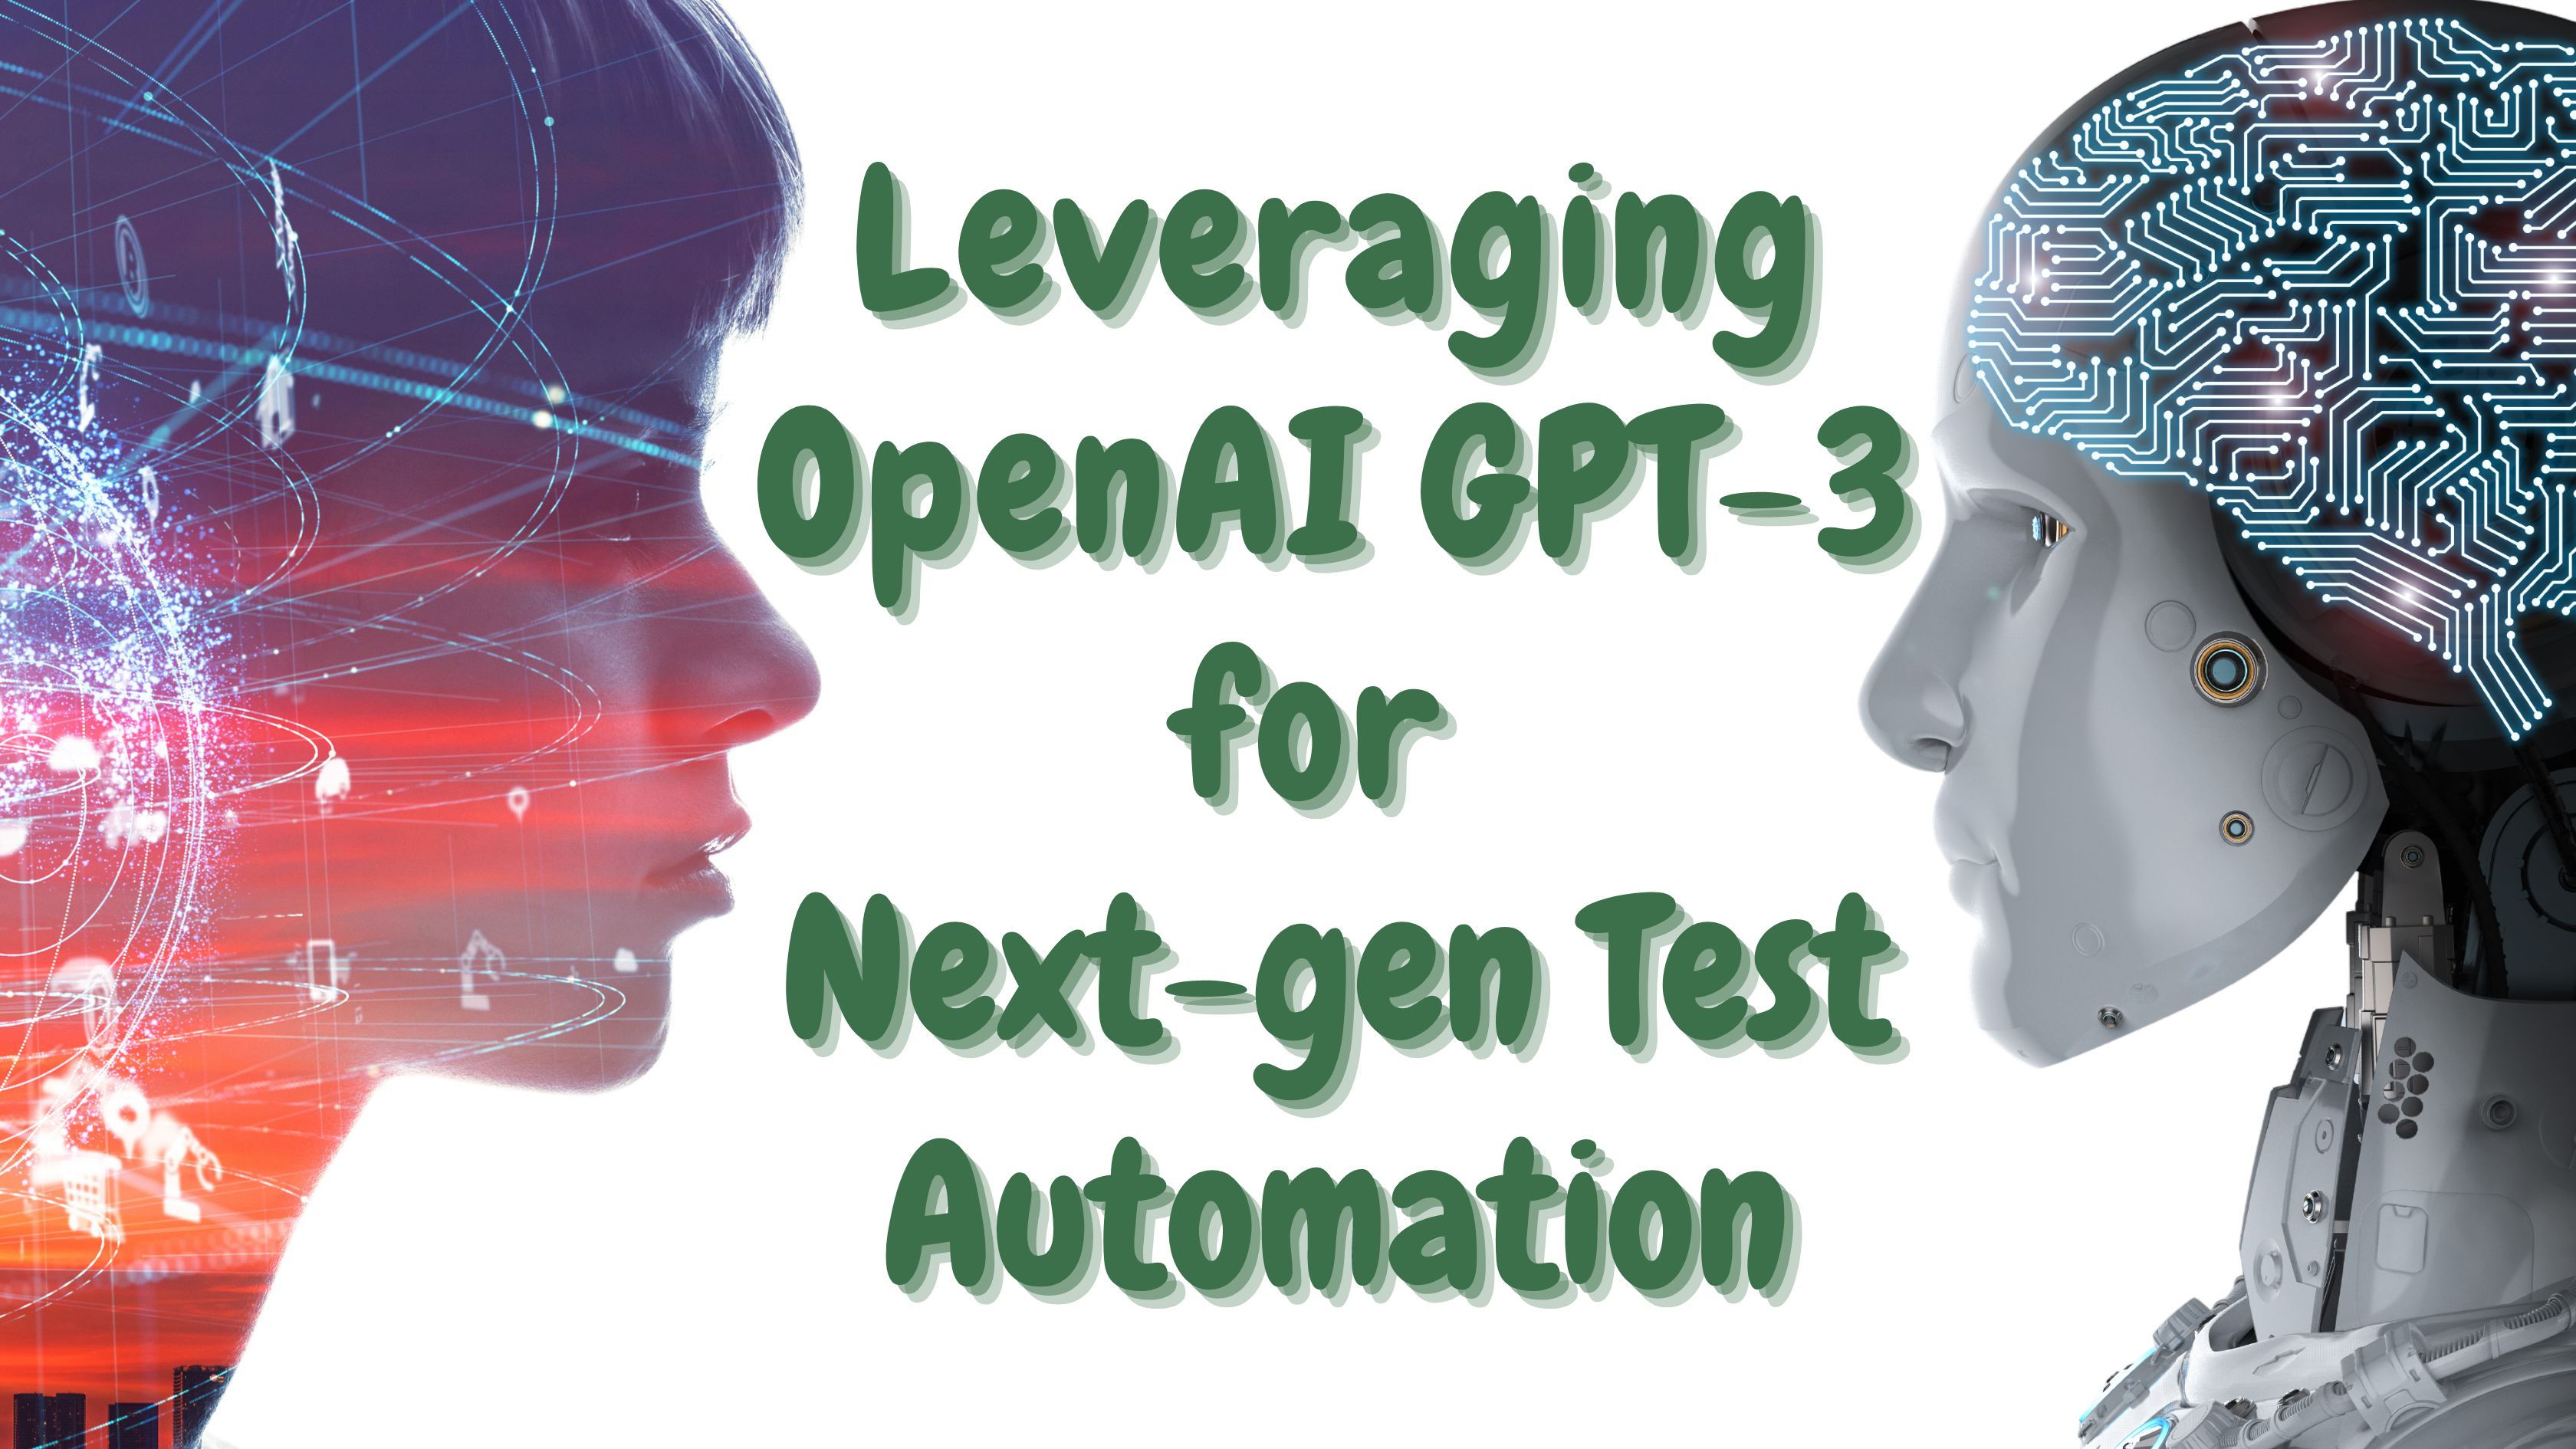 leveraging openai gpt-3 for next-gen test automation